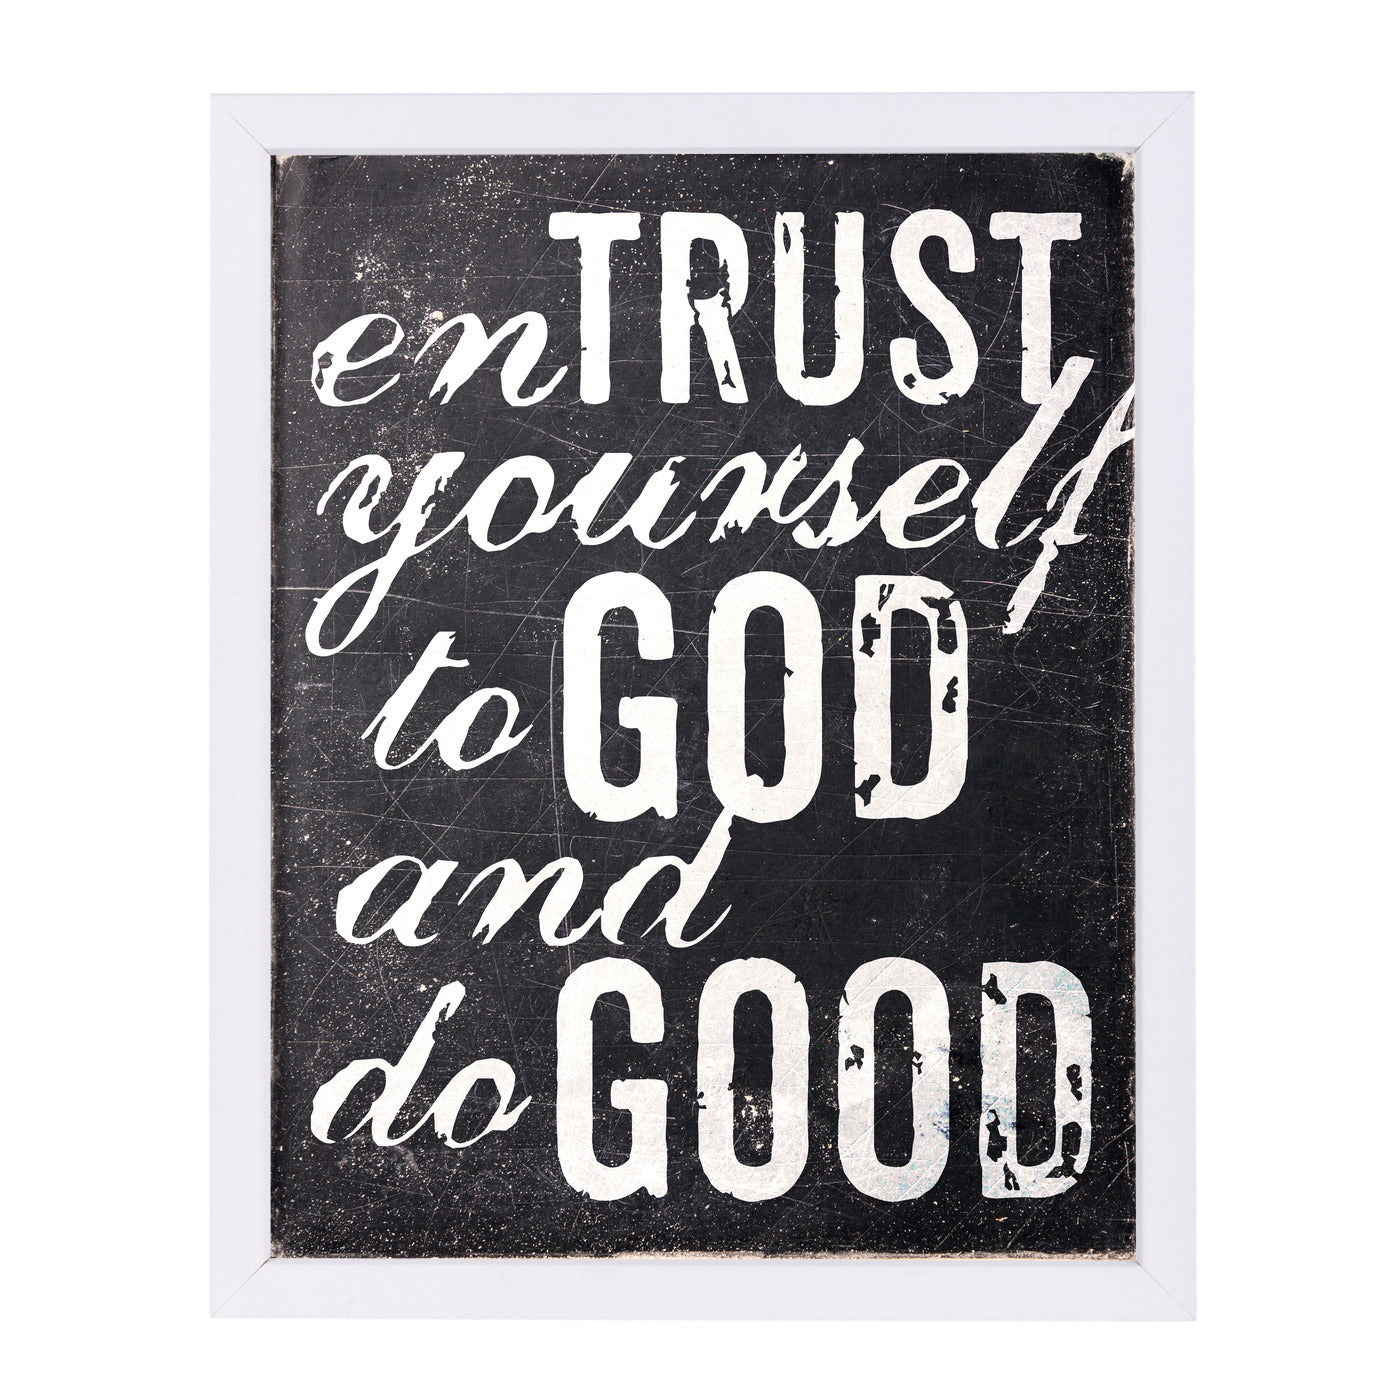 Entrust Yourself by Dallas Drotz Framed Print - Americanflat